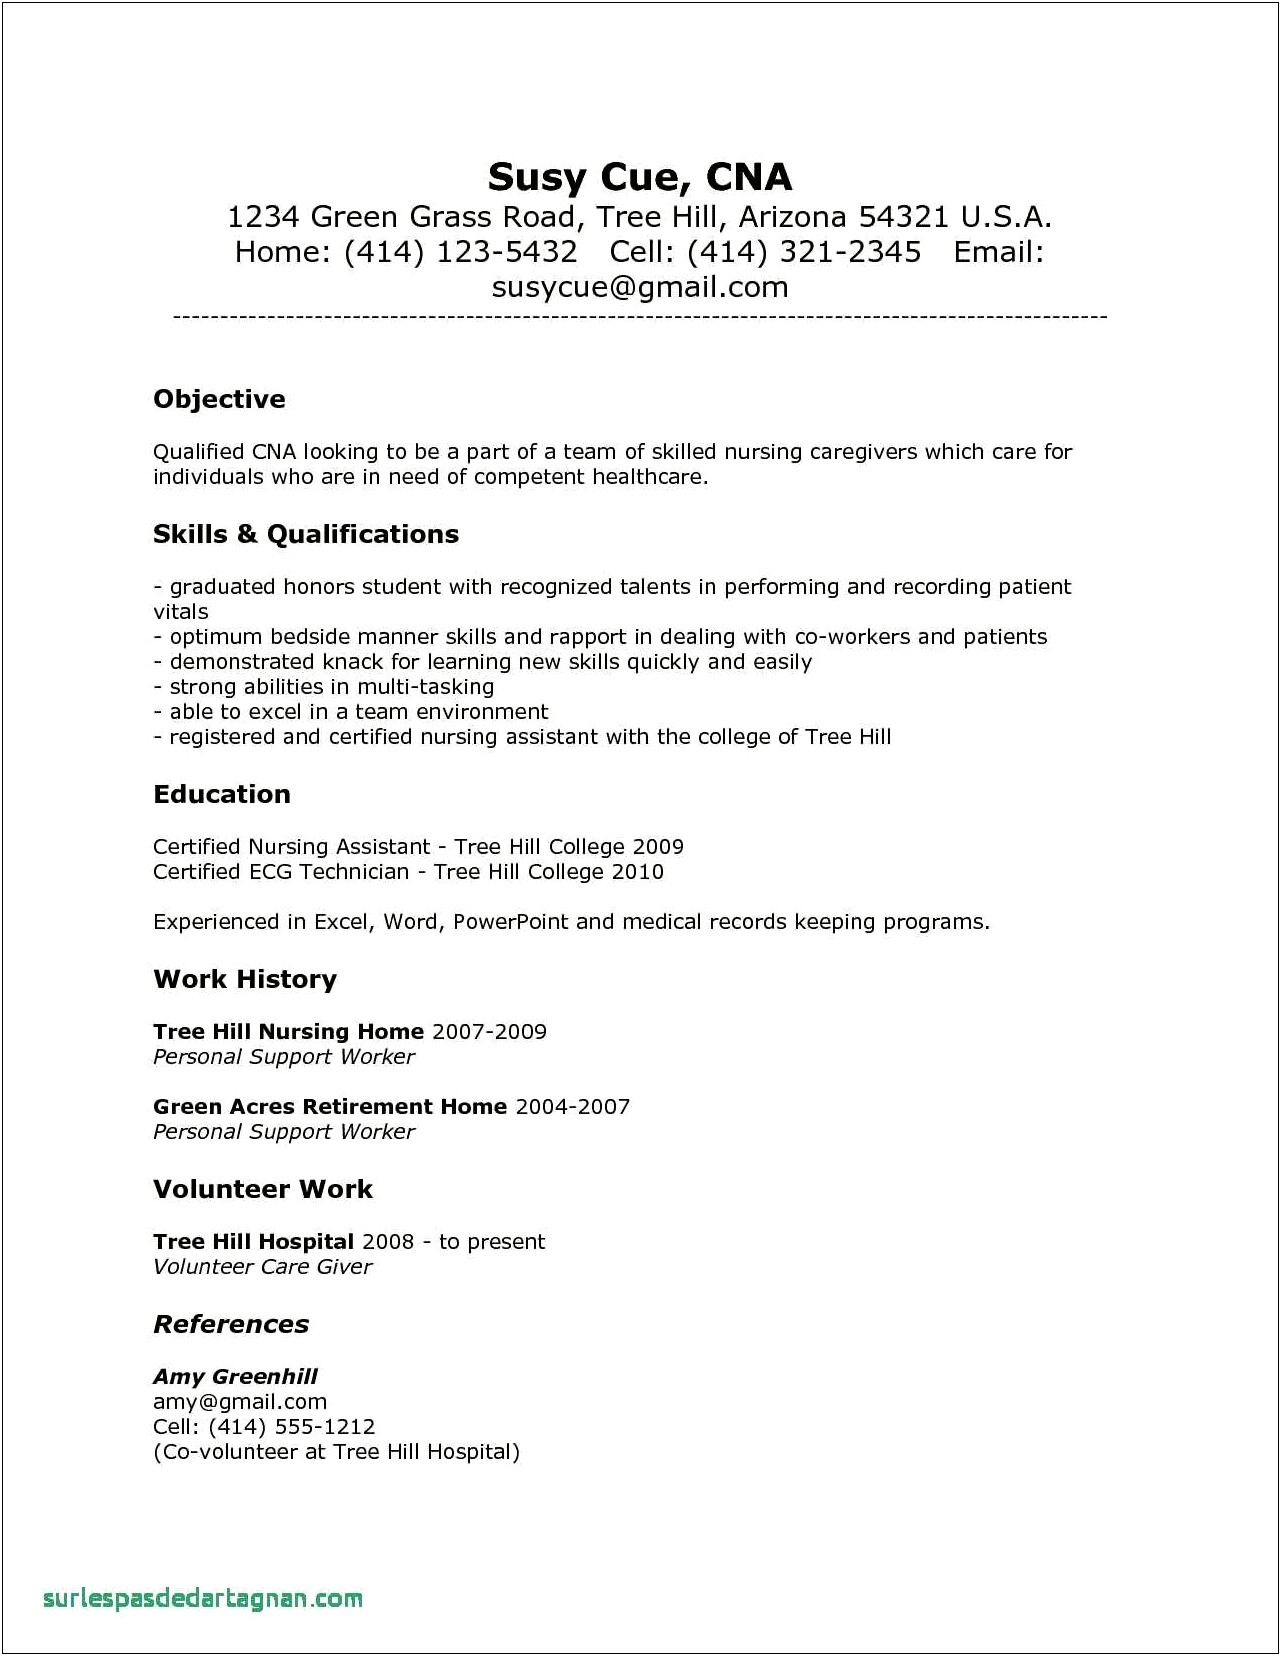 Medical Assistant Resume Objective No Experience